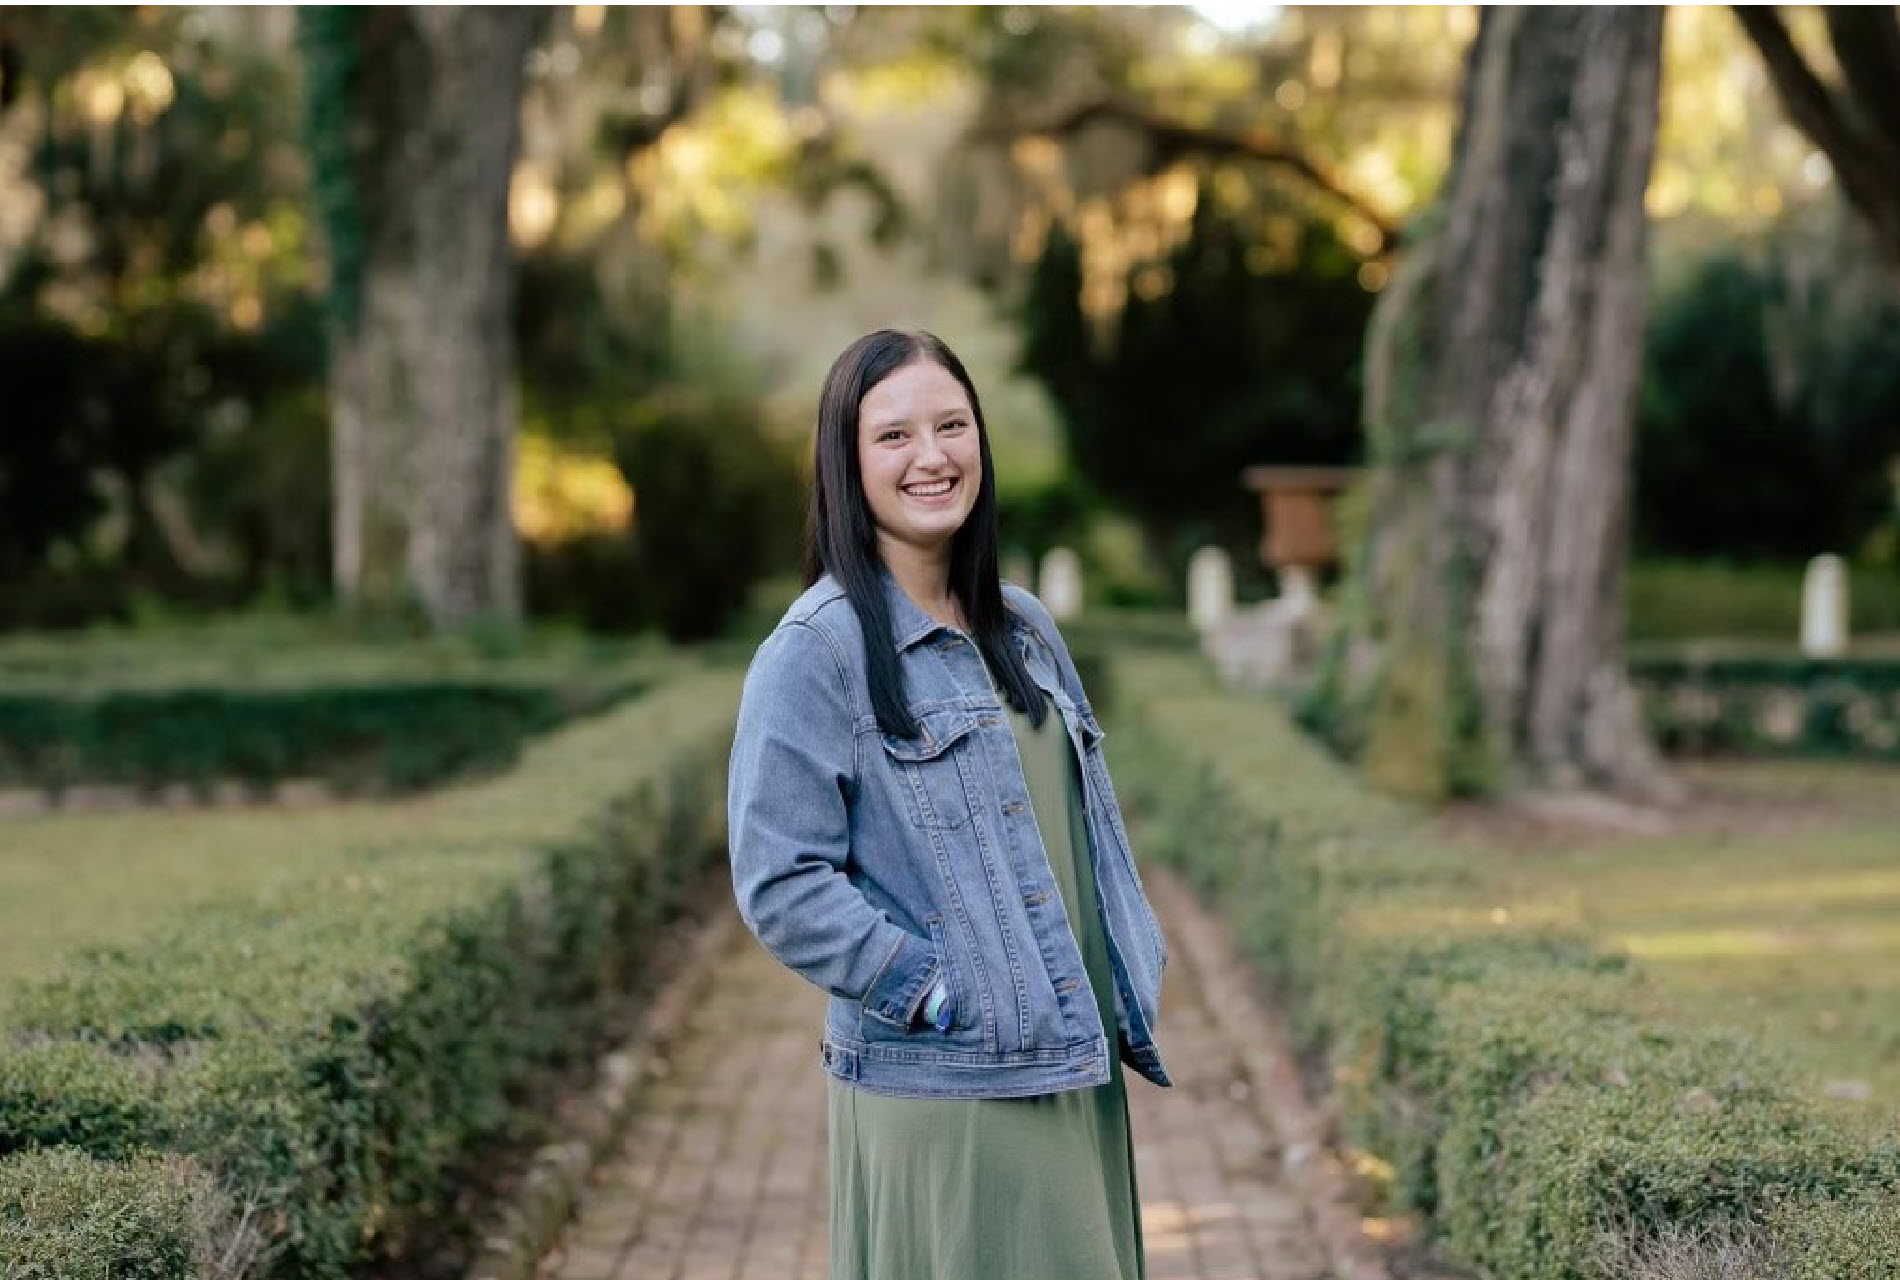 Kamdyn Lee, the grand prize winner from Denham Springs, Louisiana, who earneda $10,000 scholarship that will go toward her first-year studies this fall at Louisiana State University.